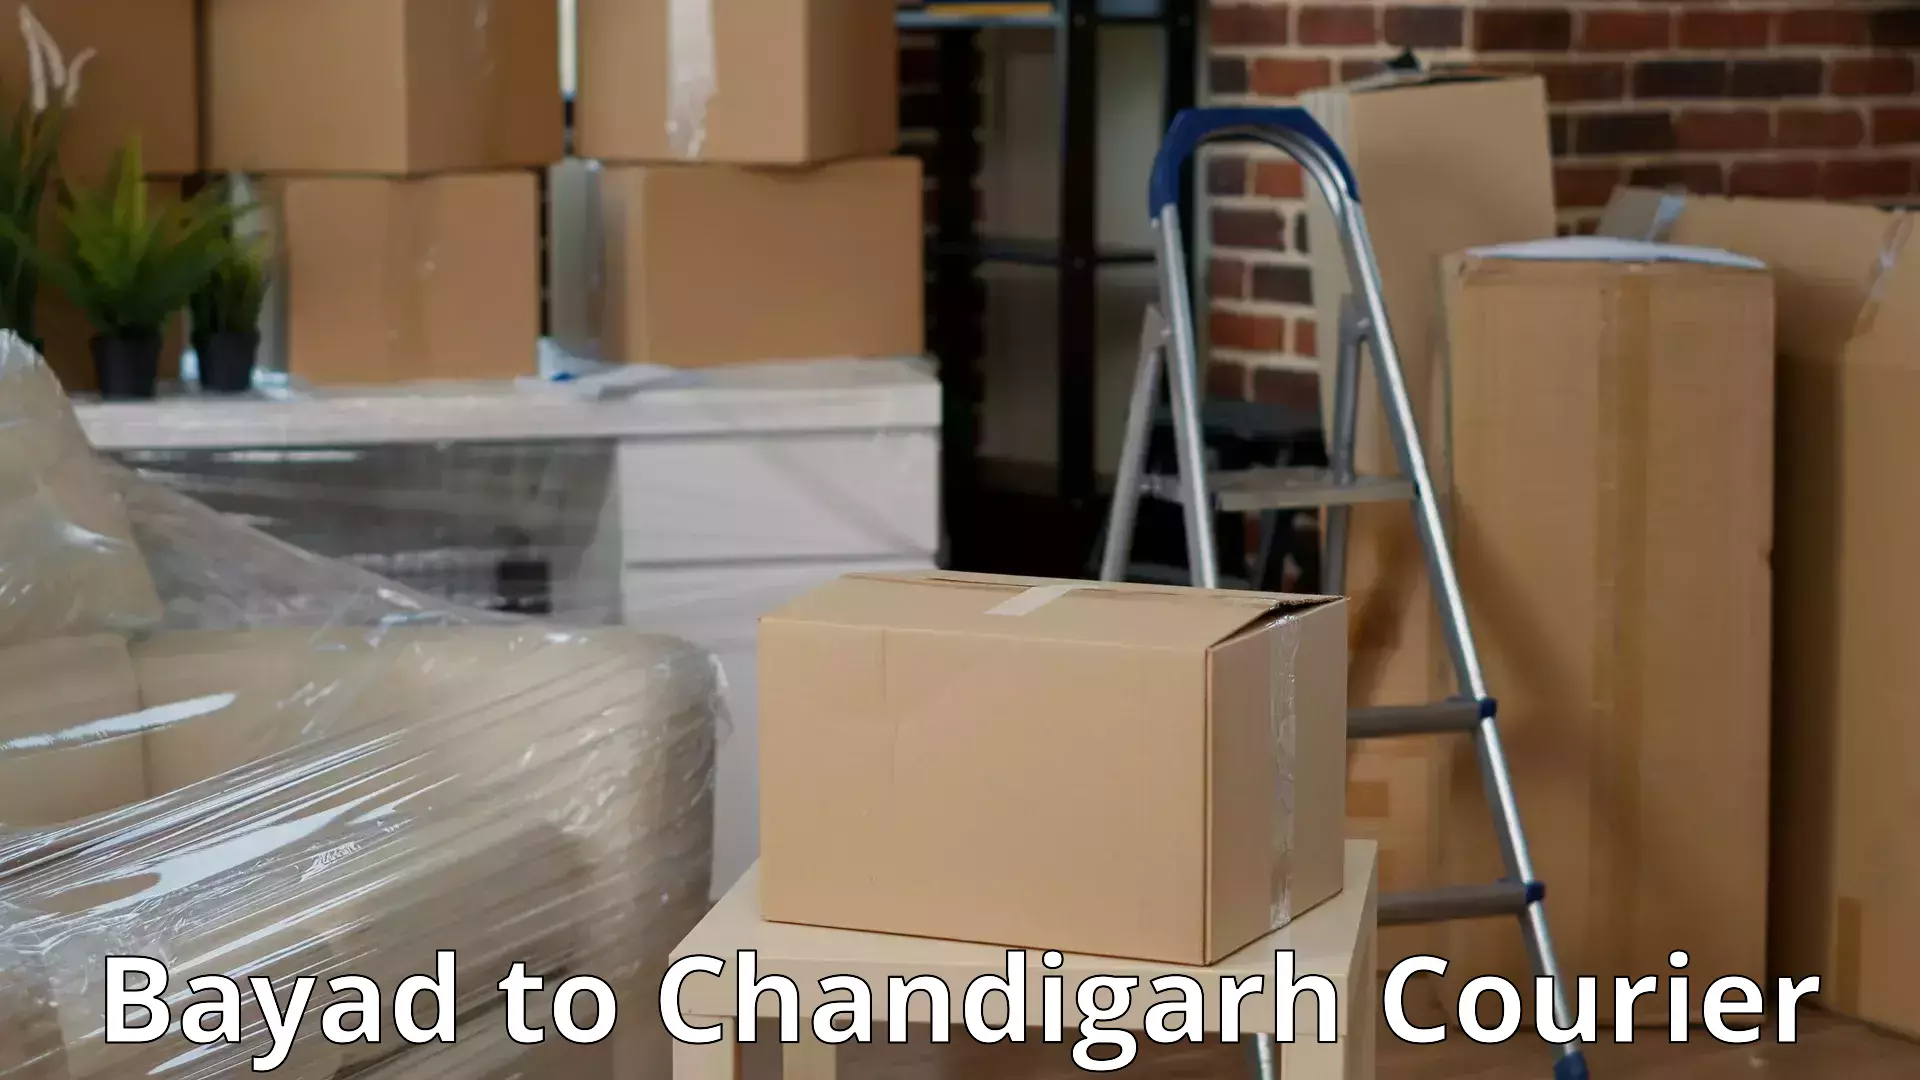 Efficient moving company Bayad to Chandigarh